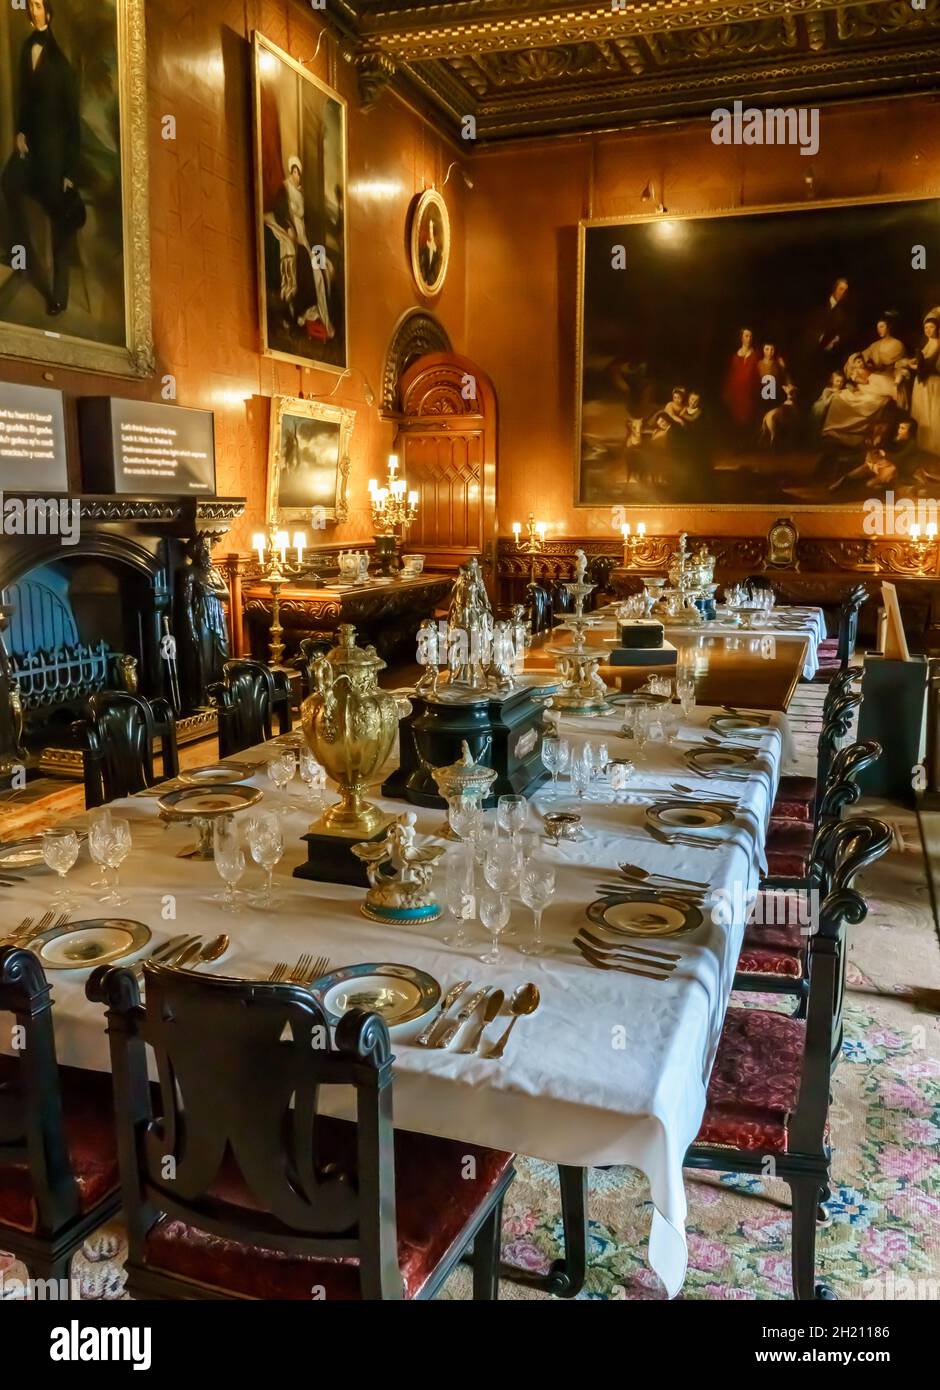 a lavish dining table and room at Penrhyn Castle, an extensive country house in Llandygai, Bangor, Wales UK Stock Photo